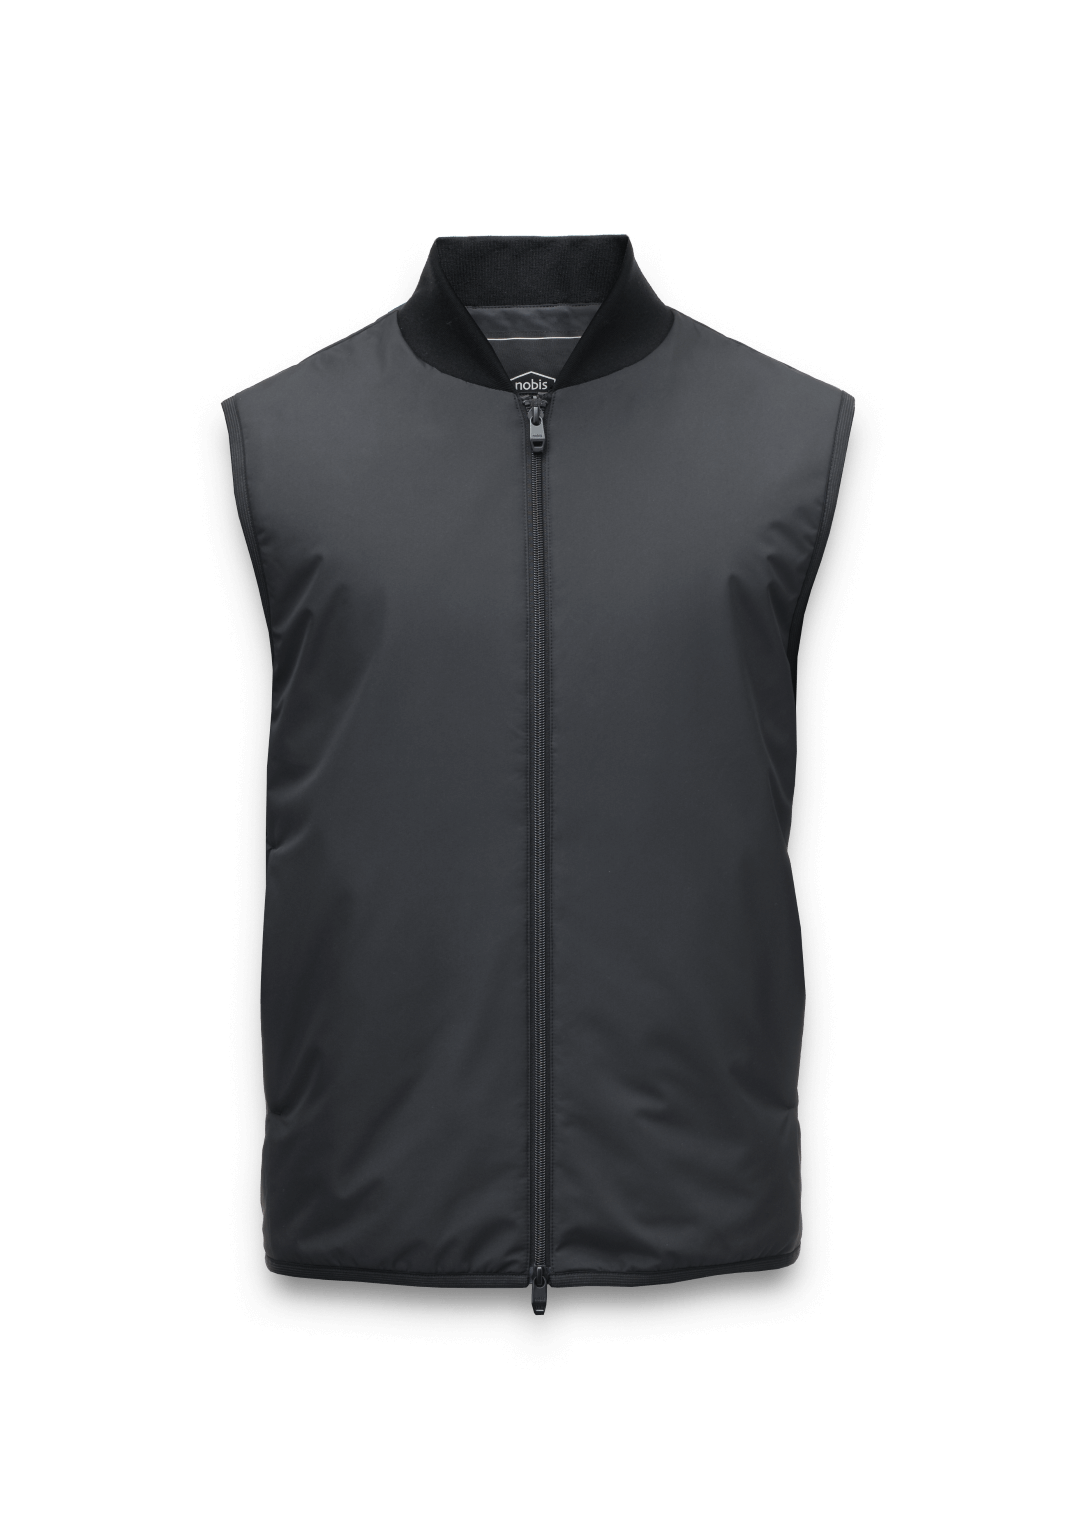 Neo Men's Mid Layer Vest in hip length, Primaloft Gold Insulation Active+, and two-way zipper, in Black